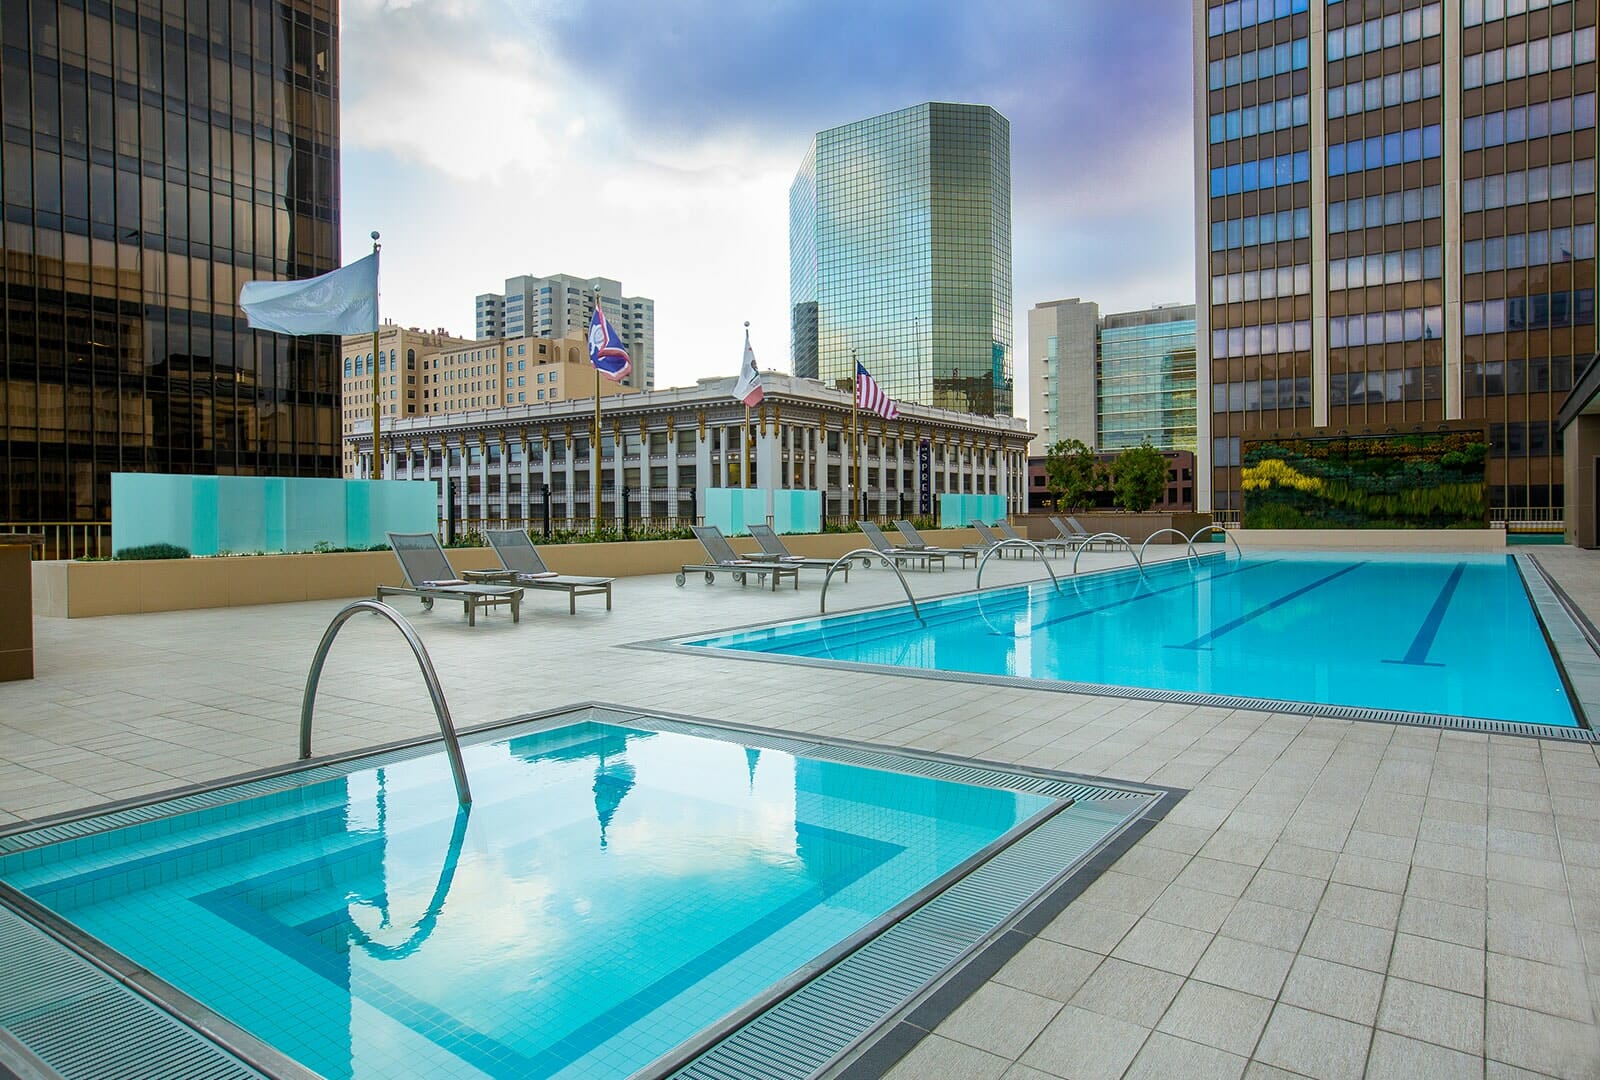 Westgate Hotel rooftop pool and hot tub with lounge chairs